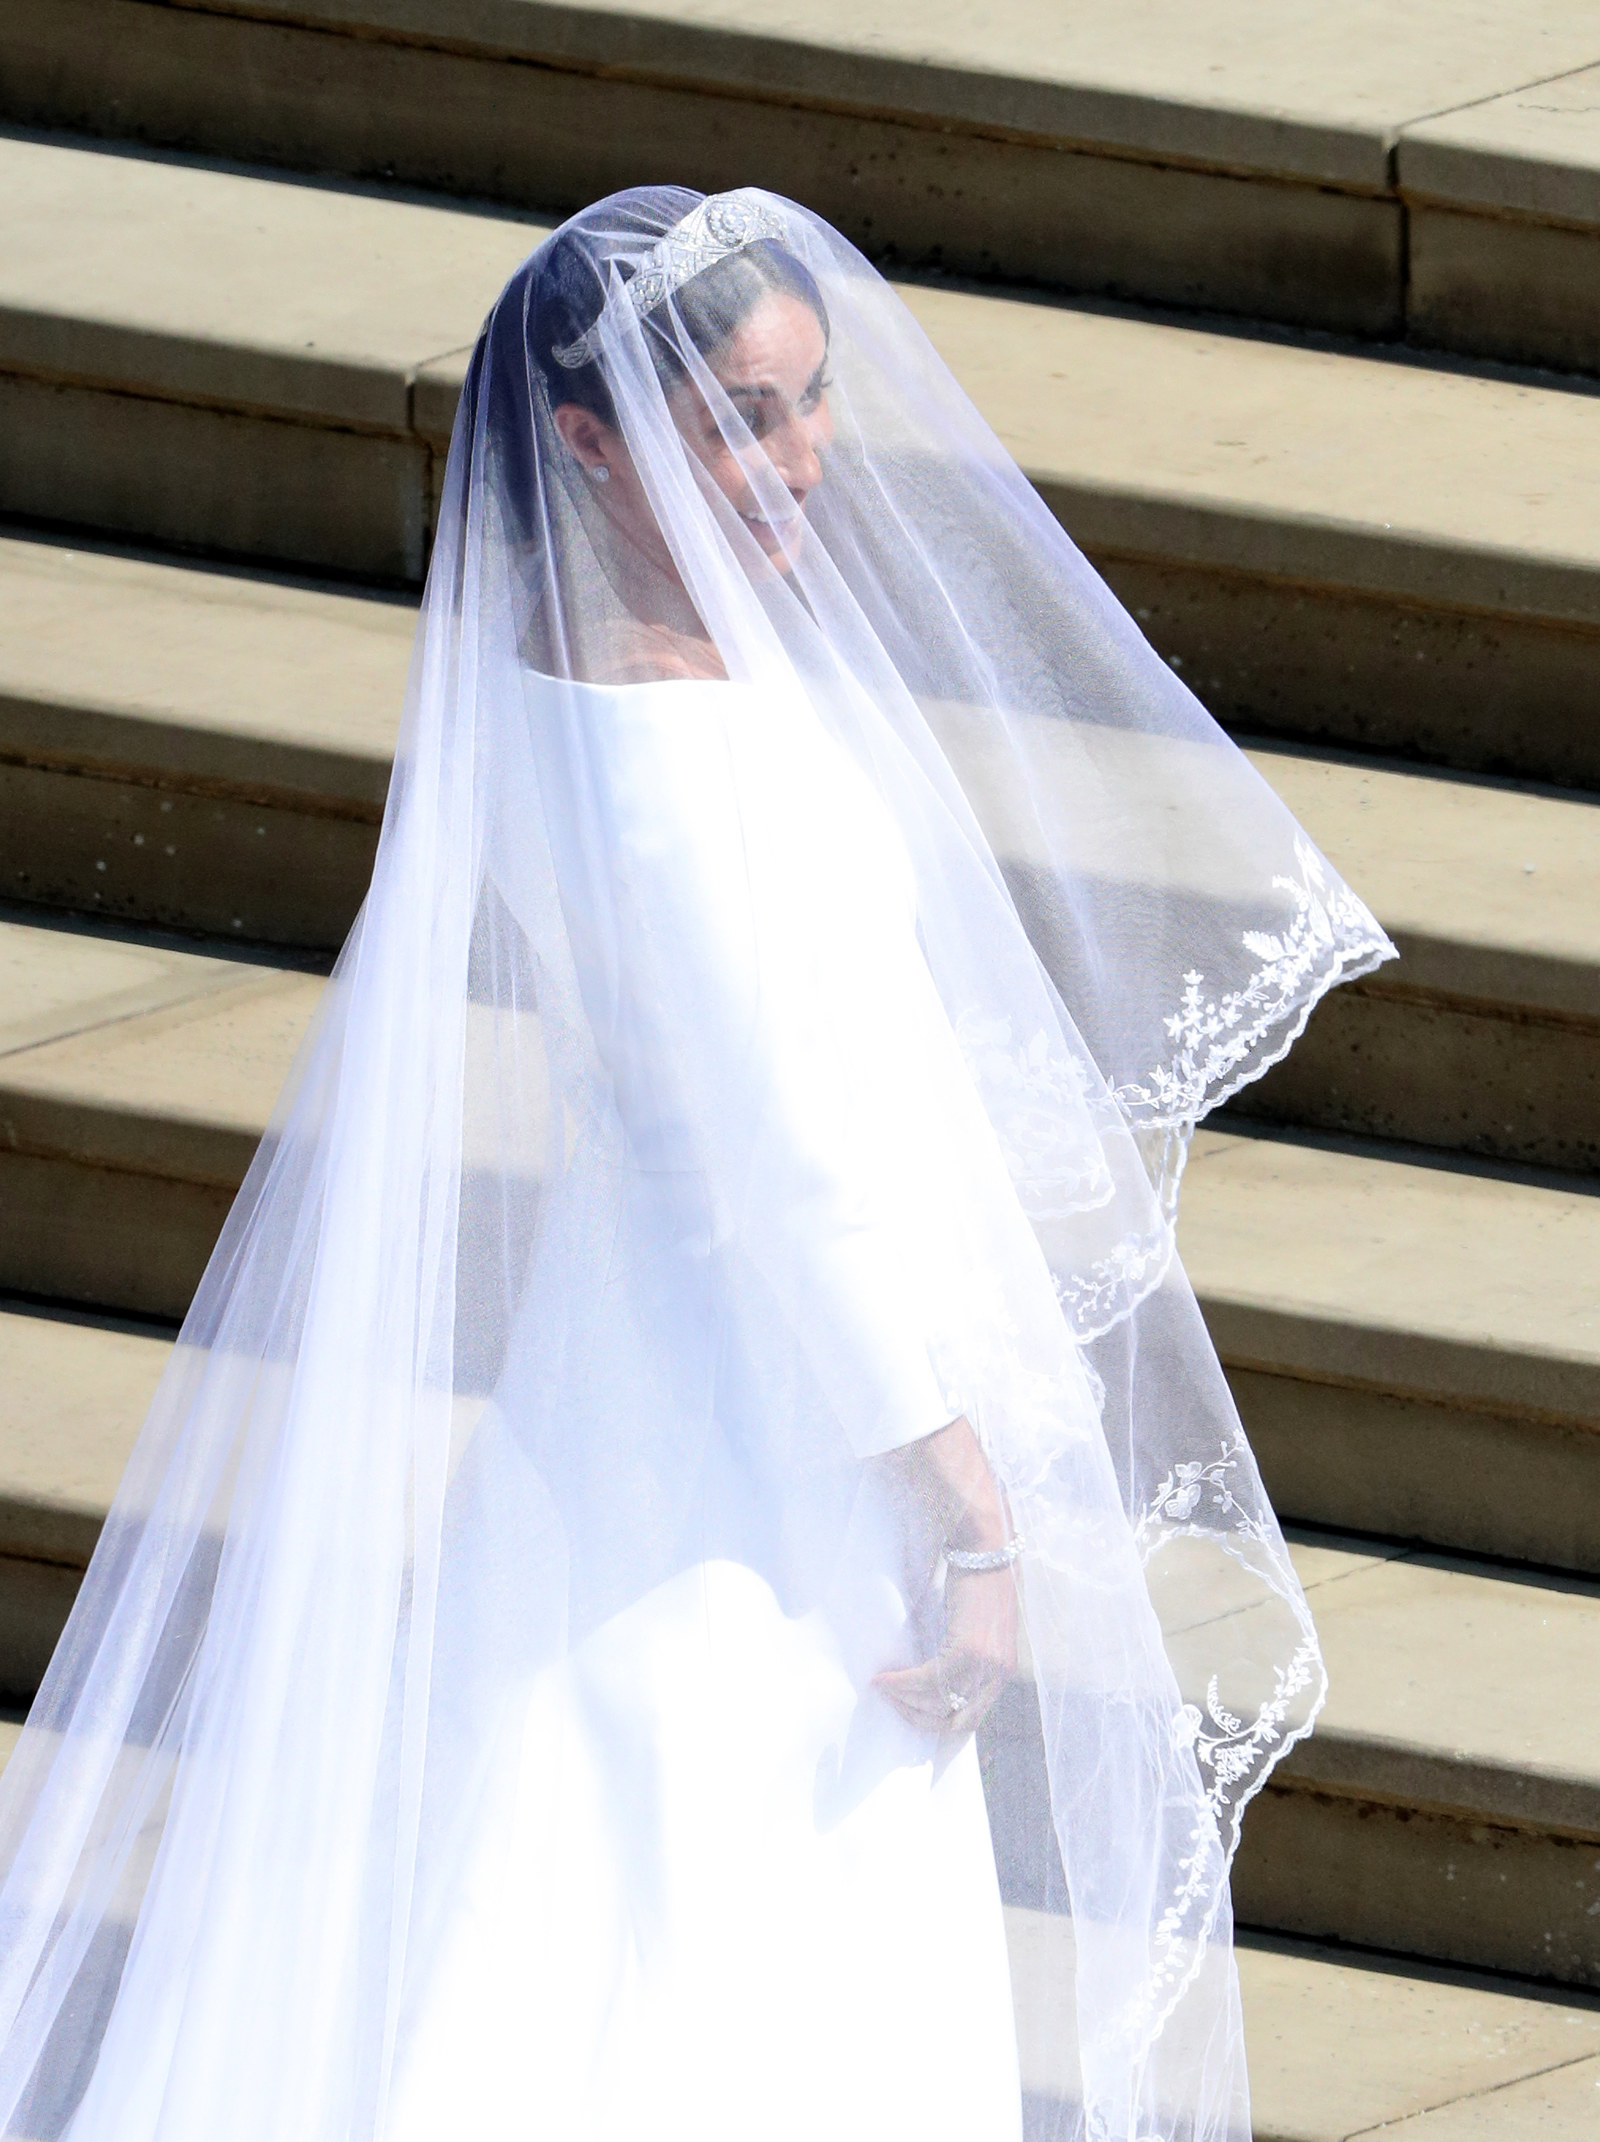 Here Are The First Pictures Of Meghan Markle's Wedding Dress